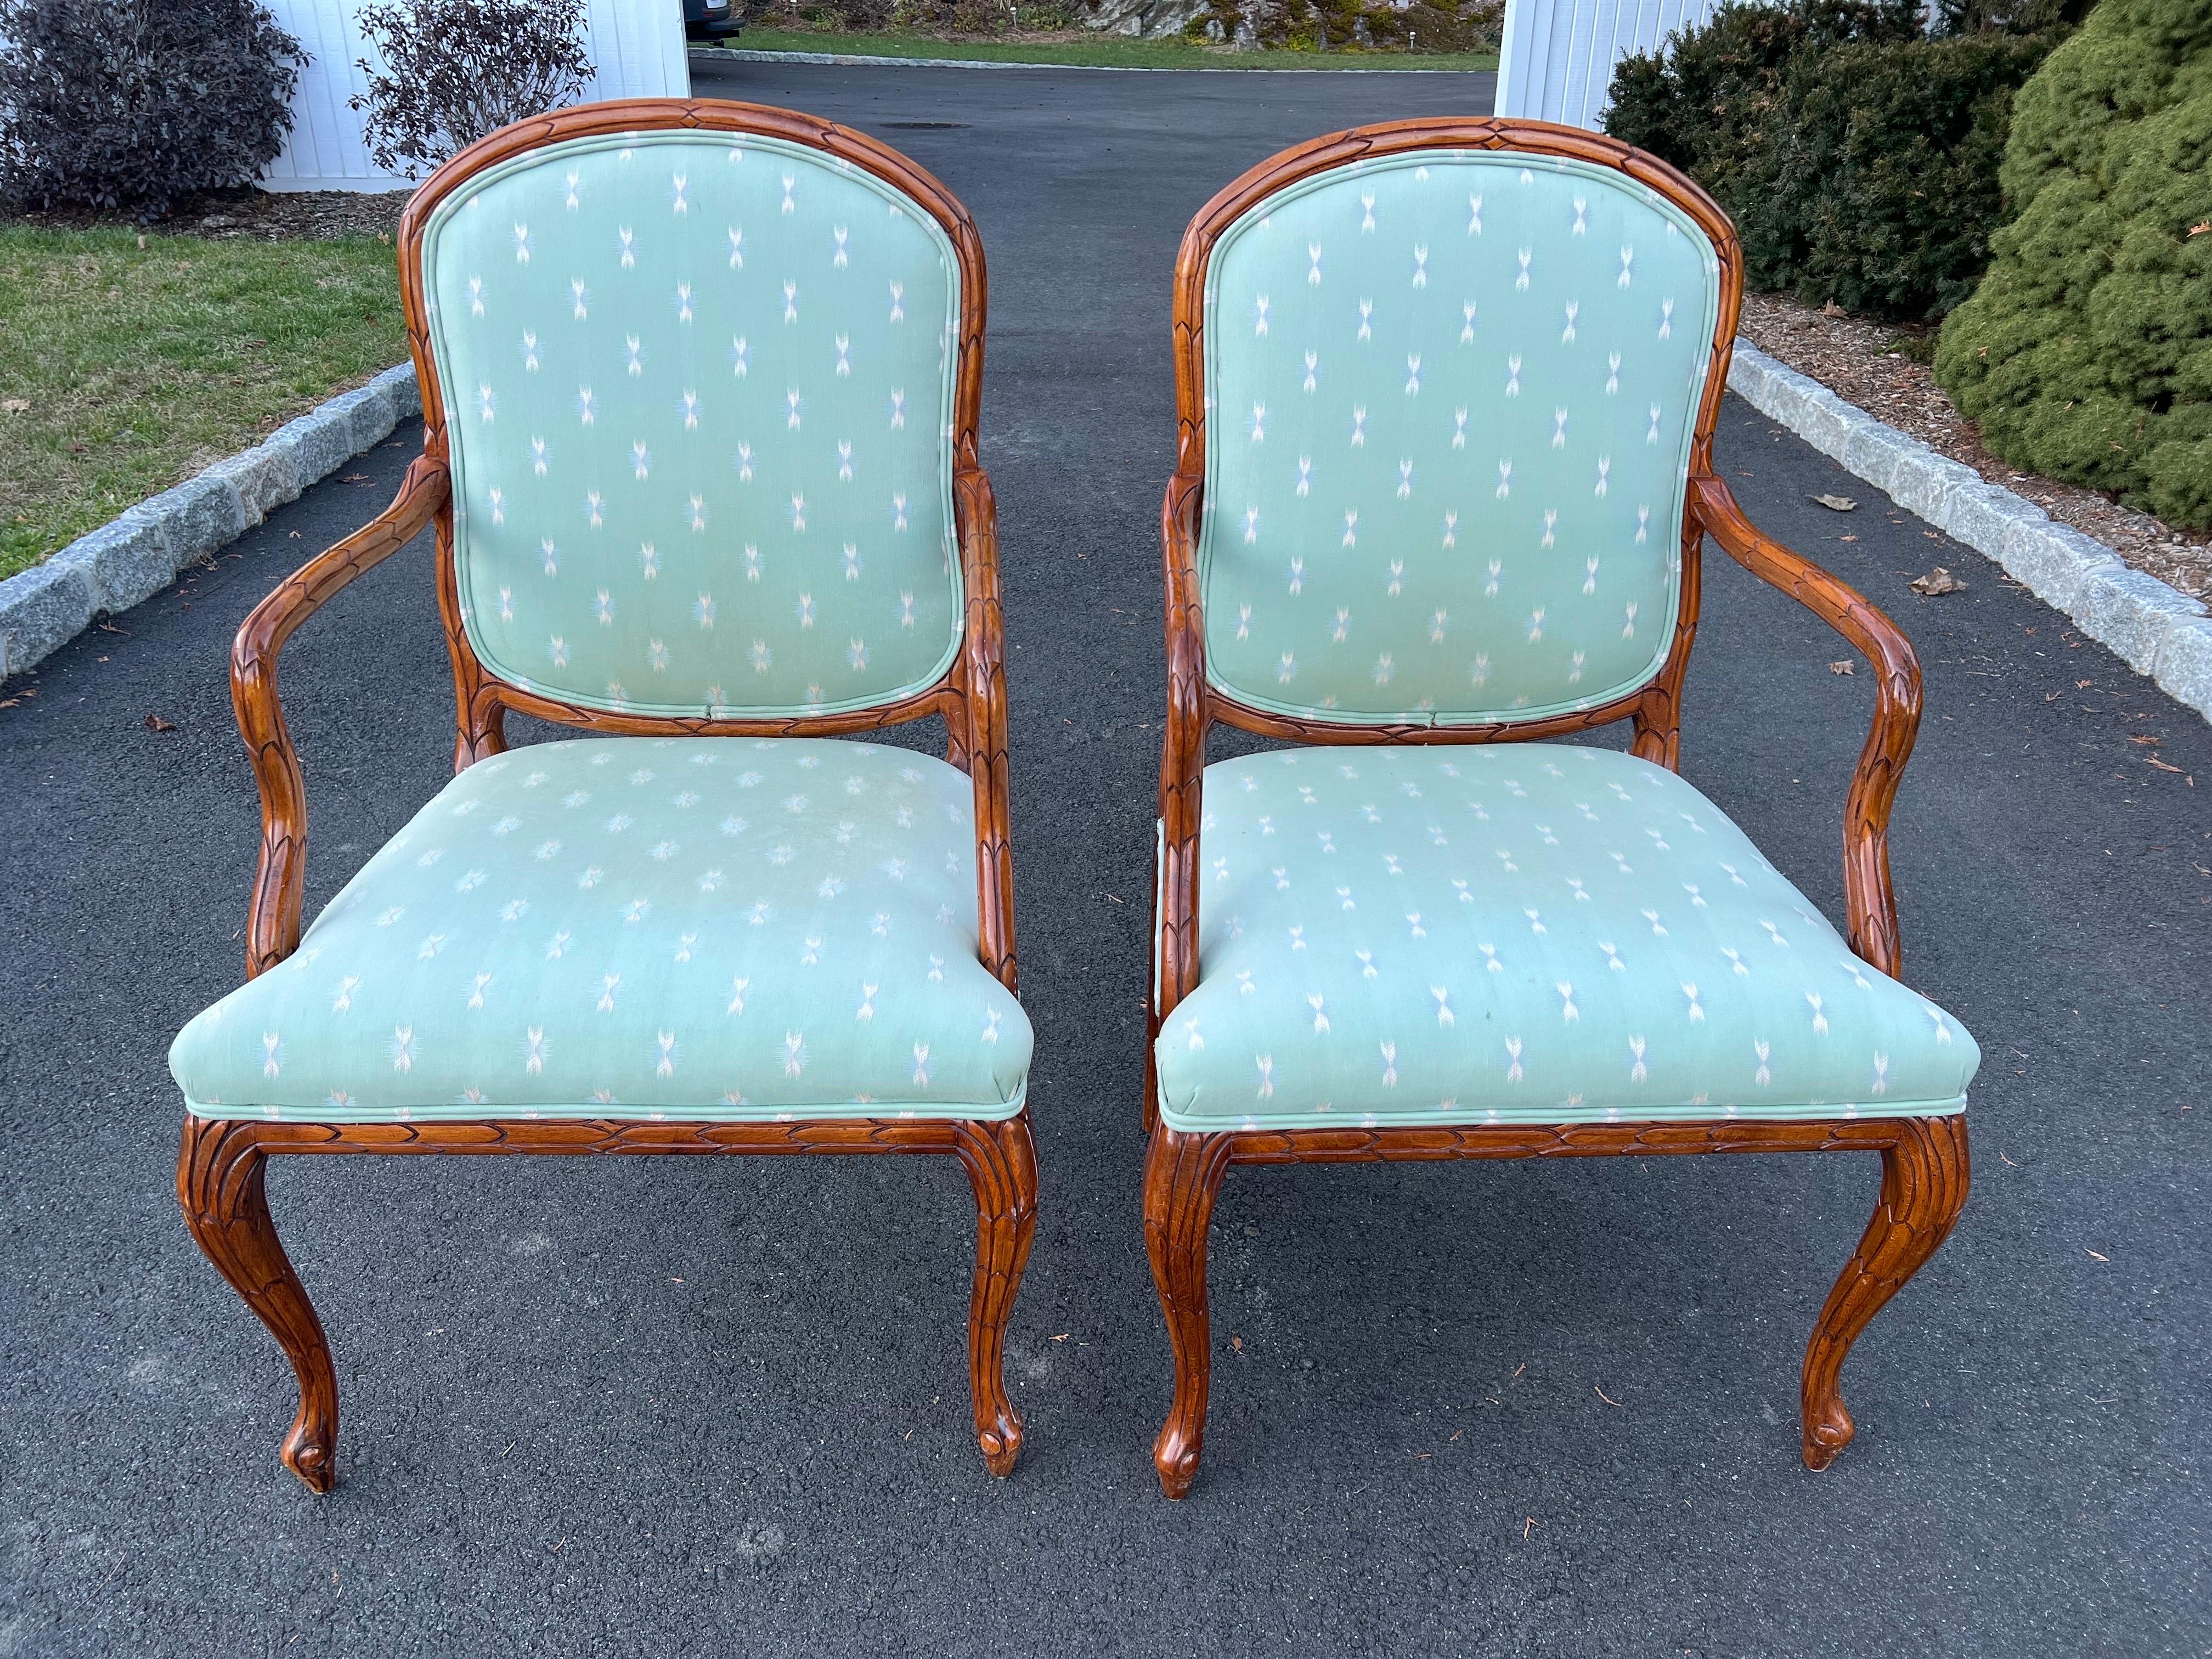 Pair of Faux Bois Bergères in the style of Serge Roche. Classic pair of arm chairs for a living room or bedroom. Solid wooden construction. Elaborately carved in a Faux Bois style. Light sage green upholstery with accents of pink and white. The arm